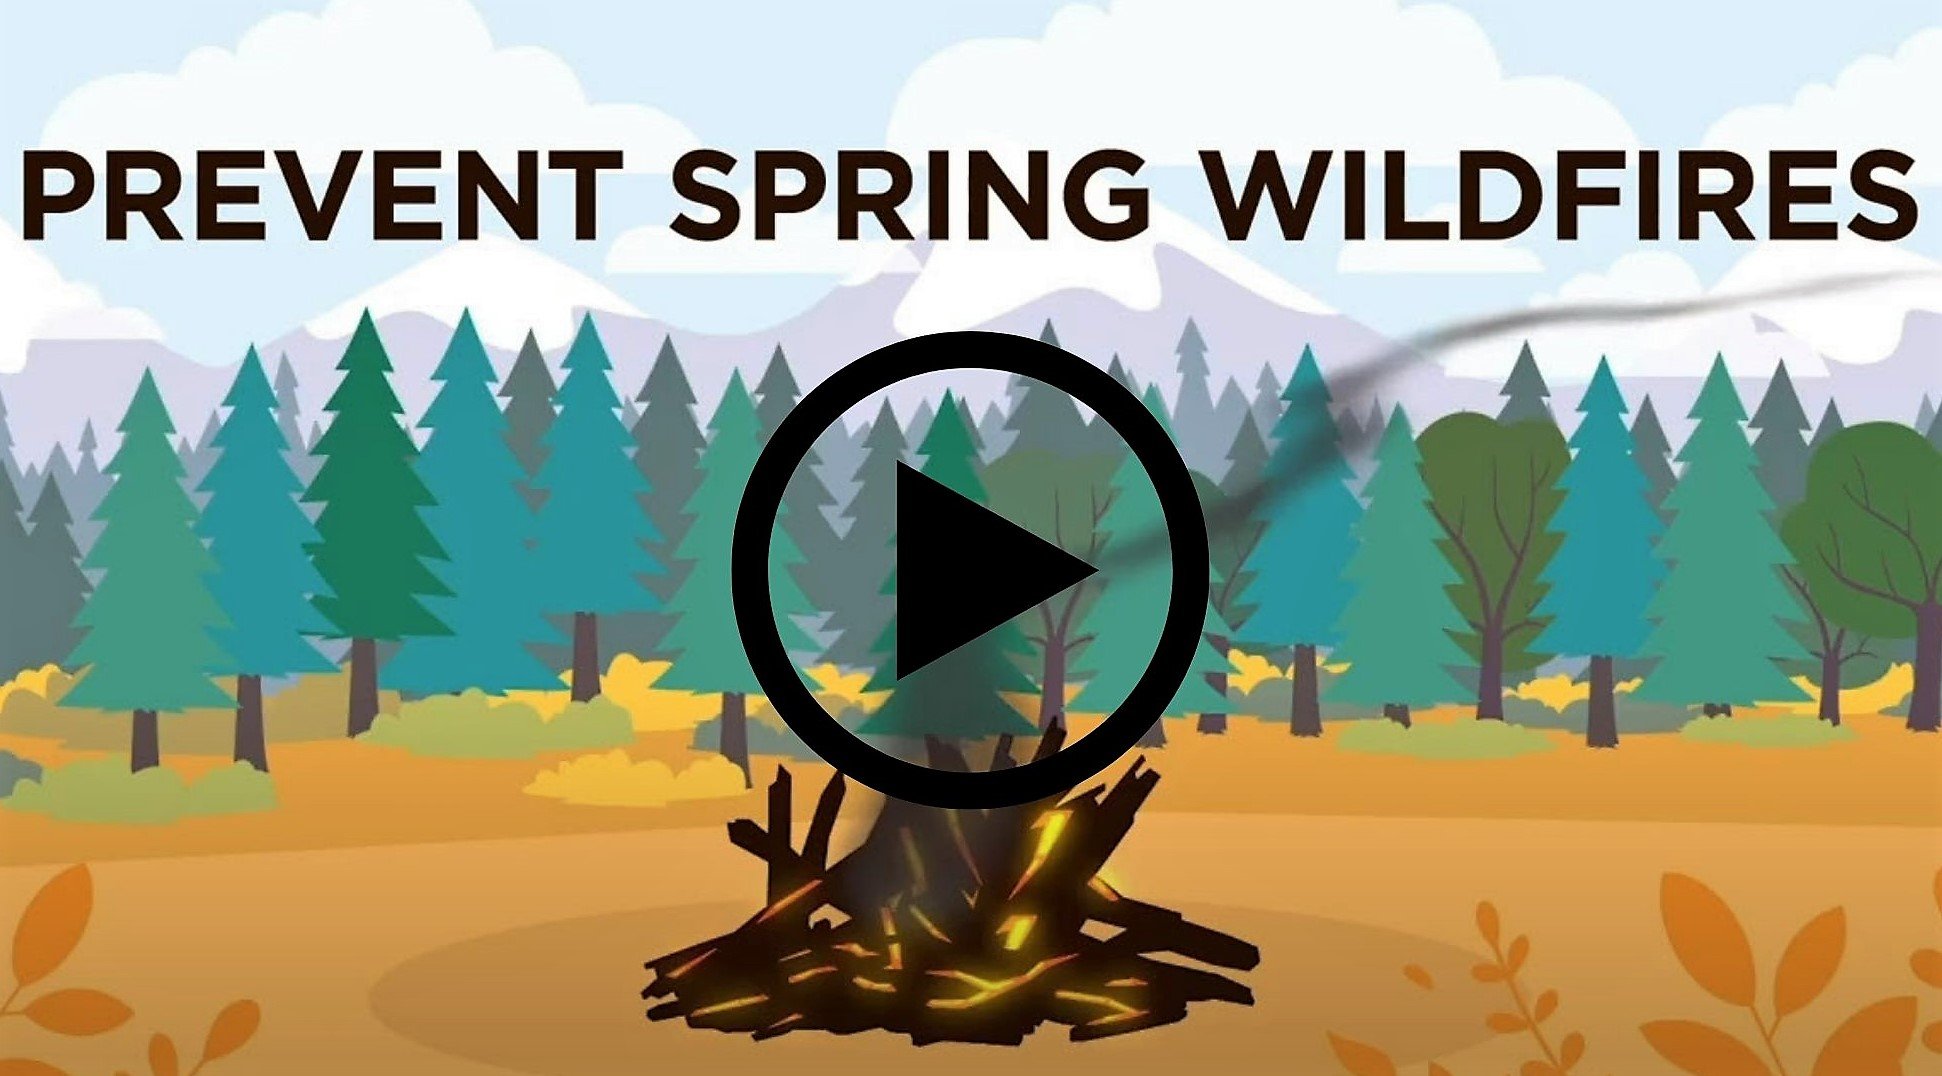 Prevent Spring Wildfires Video (edson) cropped